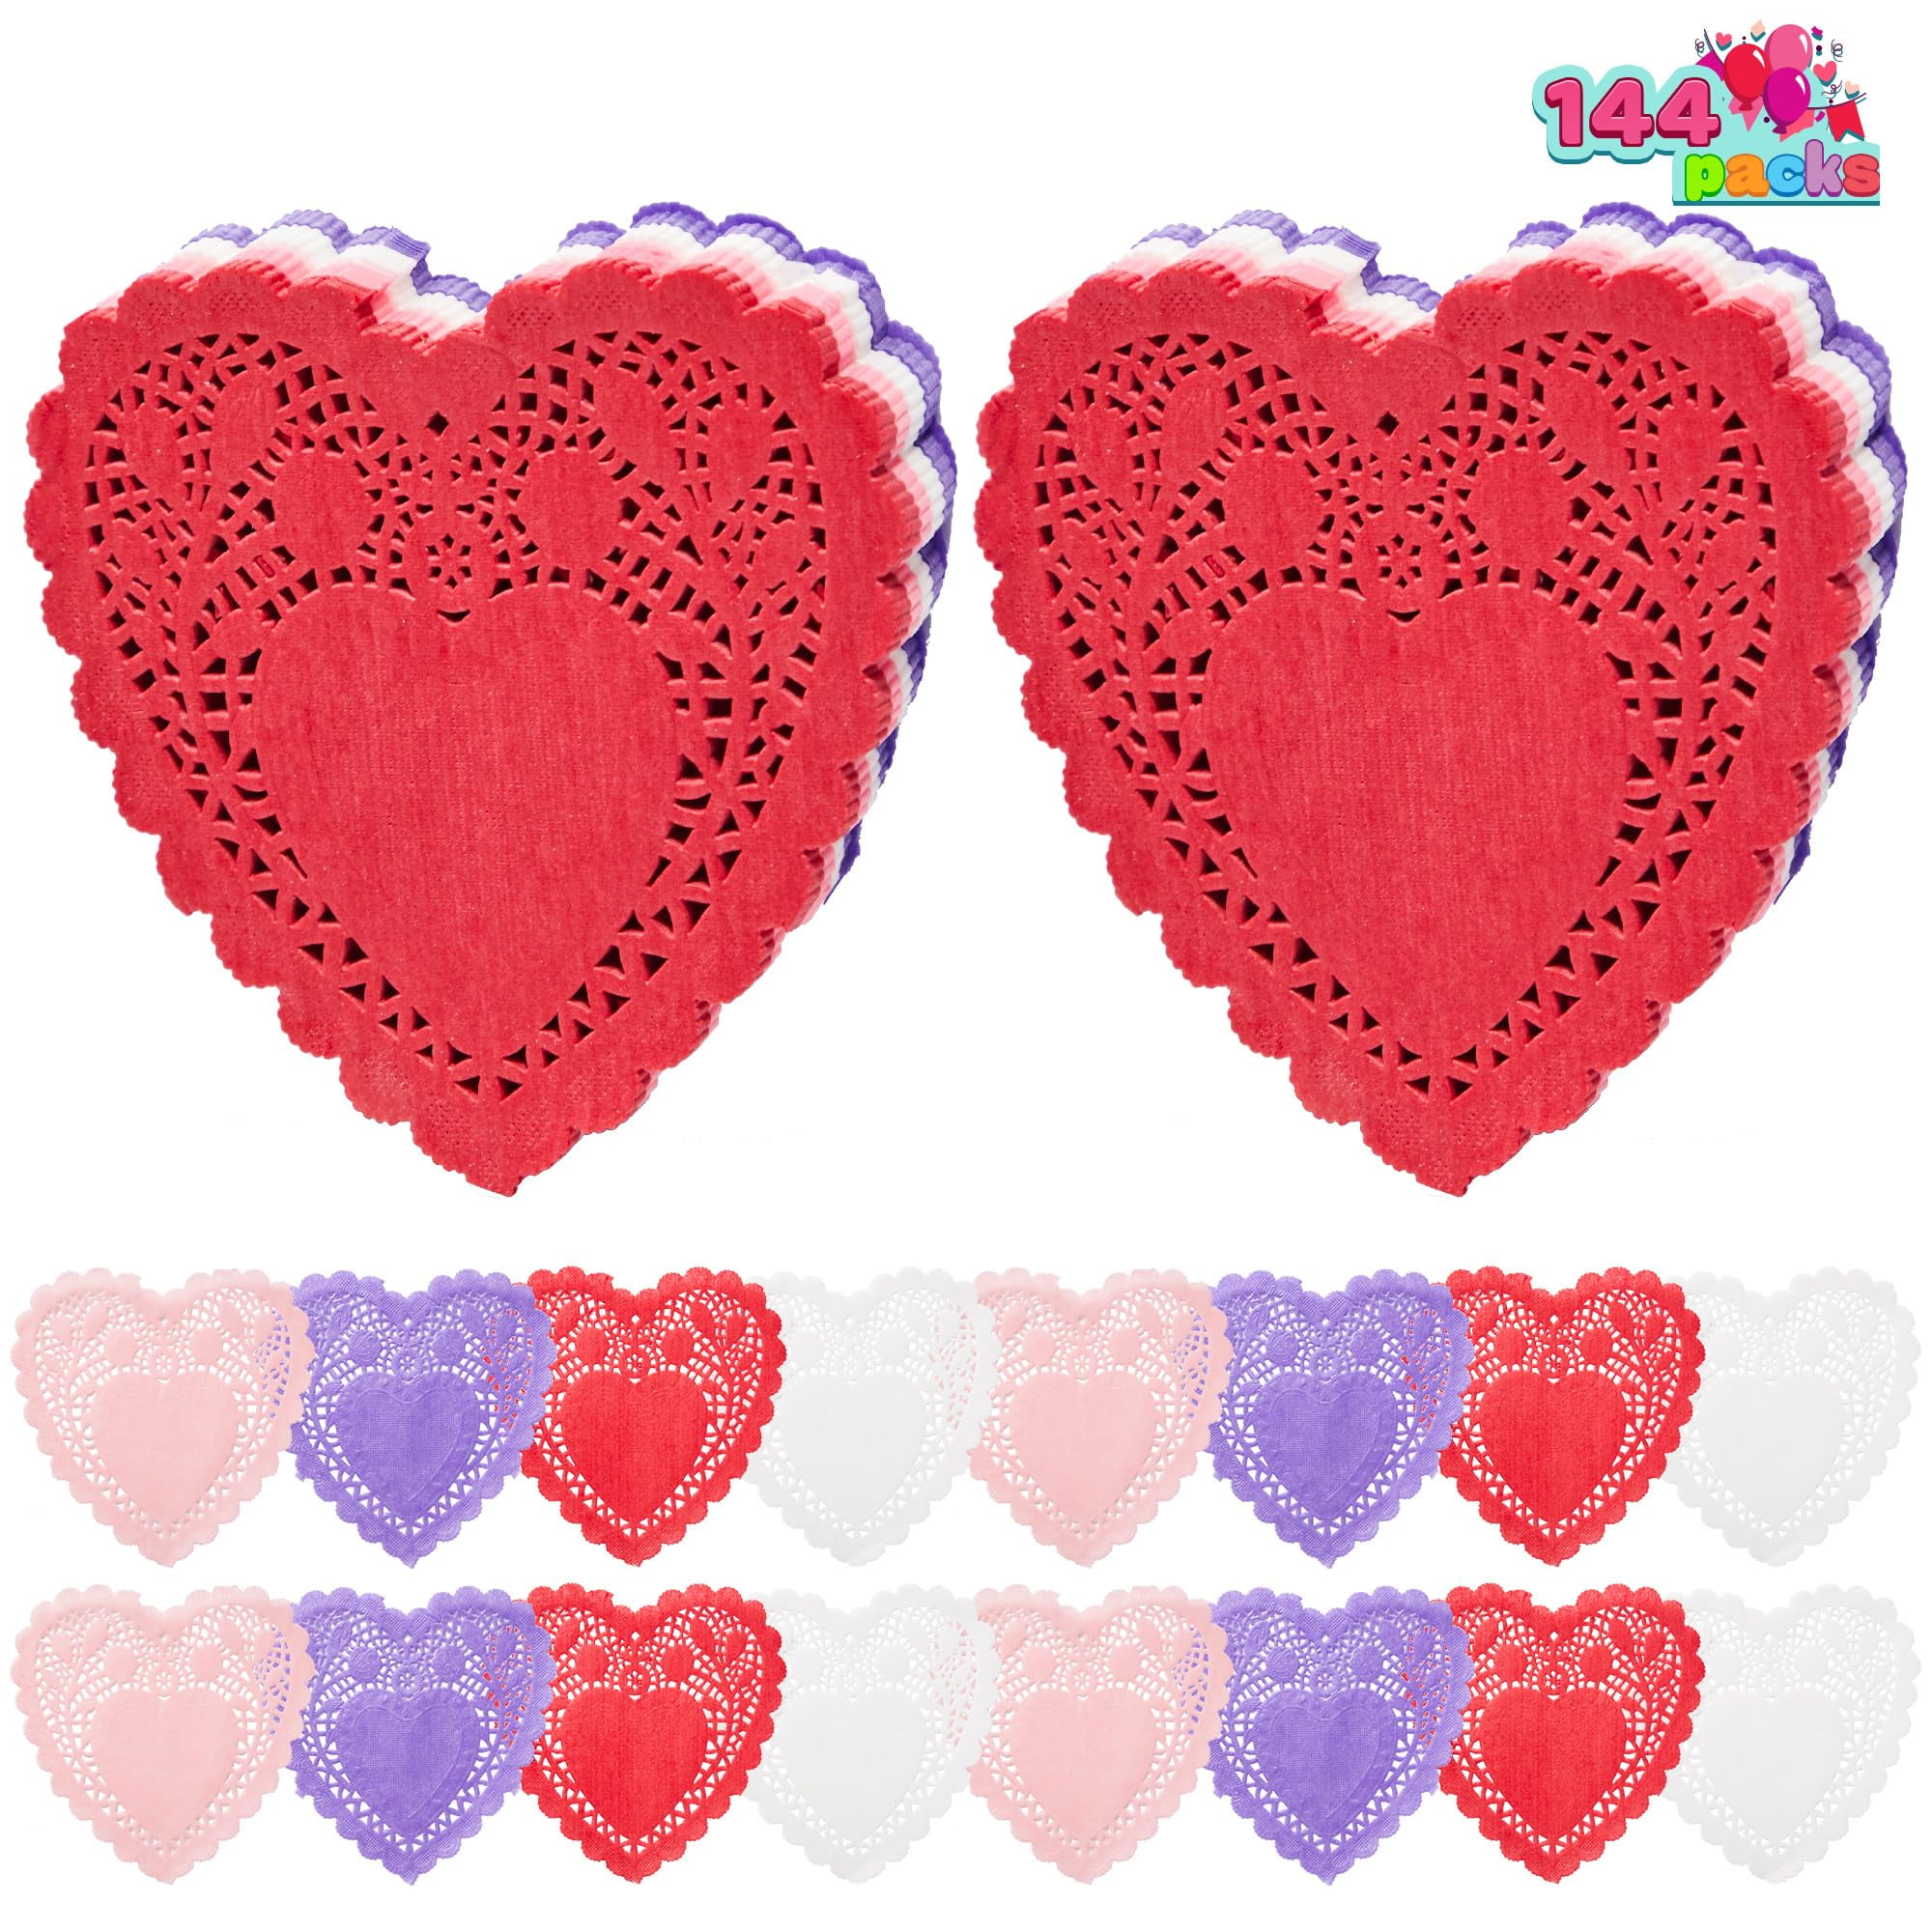 Buy Hygloss Products Heart Paper Doilies - 4 Inch Pink Lace Doily